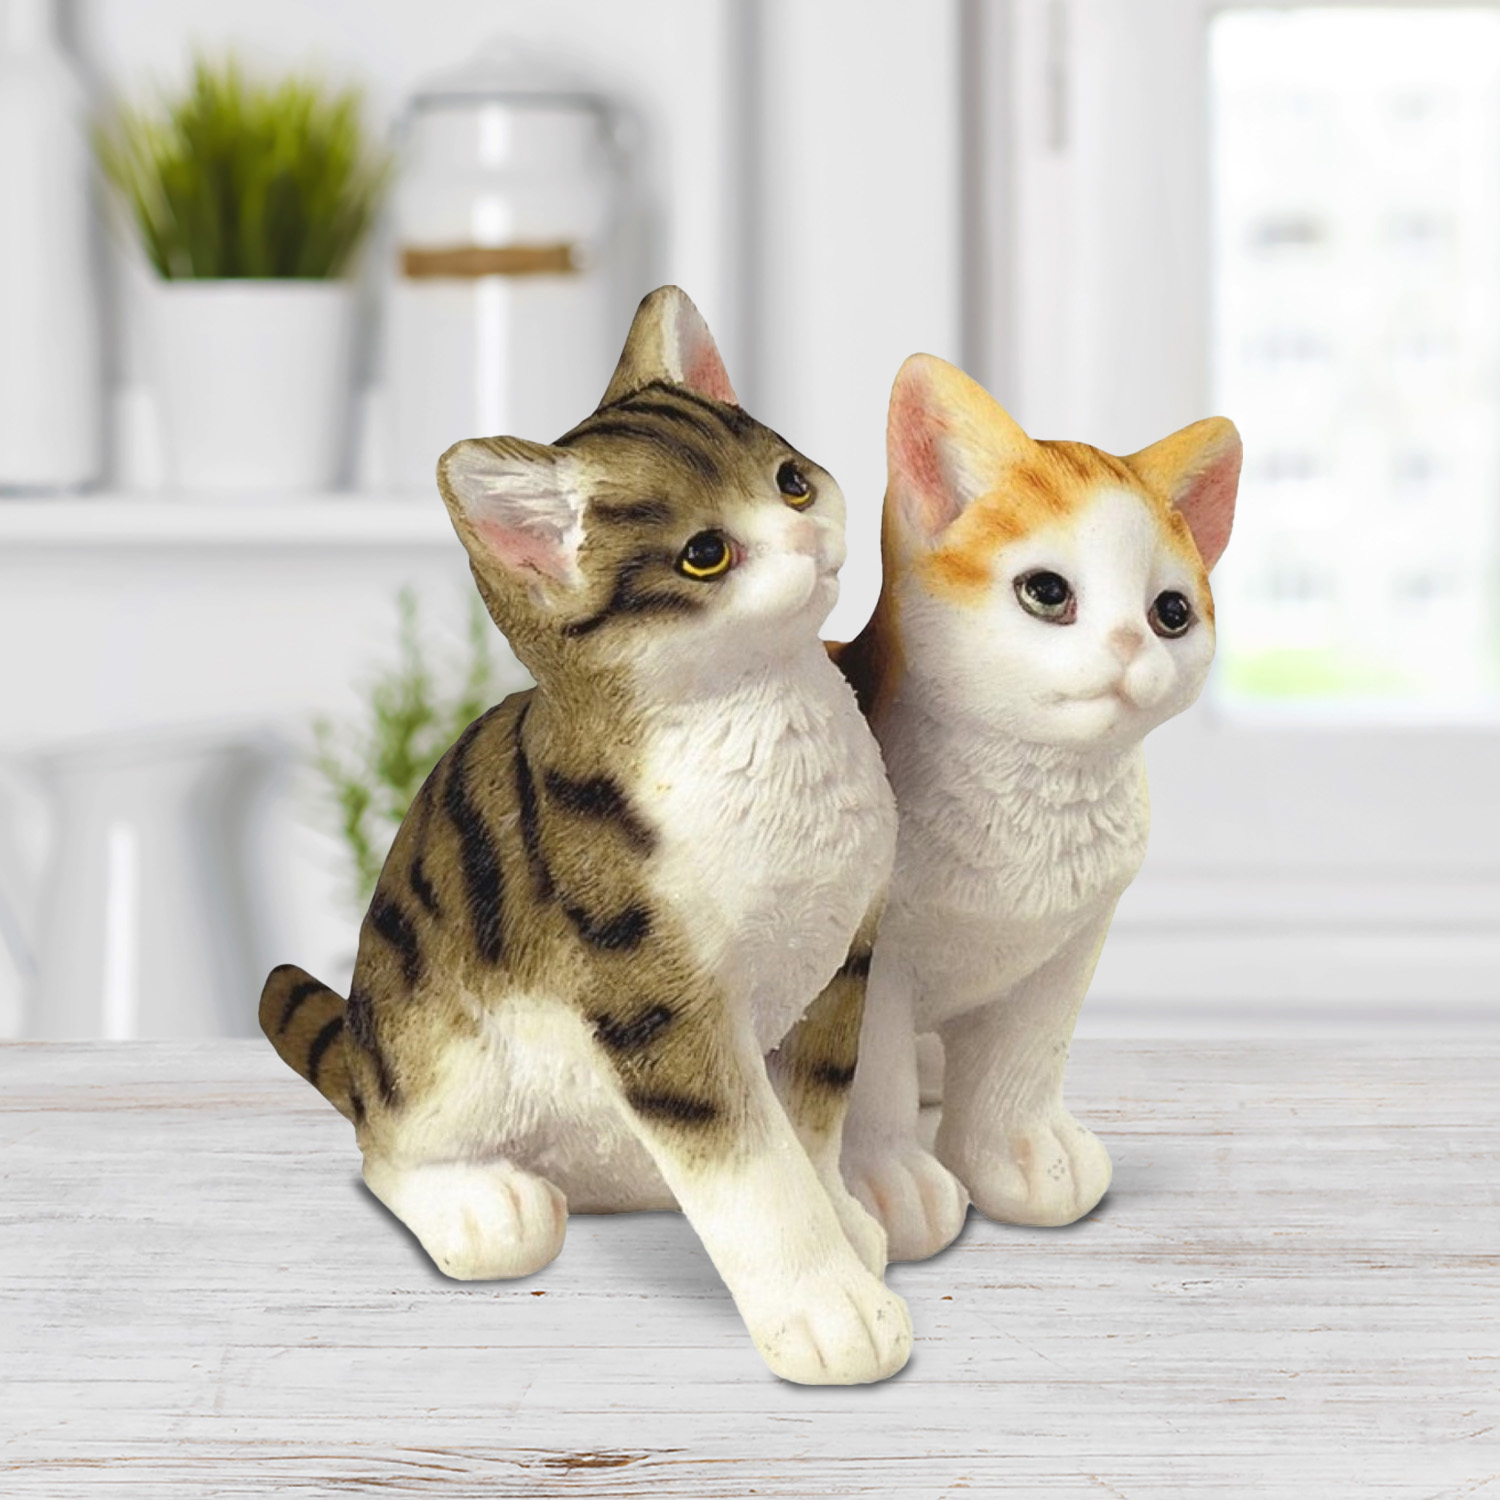 

4"h Brown Tabby And Orange Tabby Sitting Side By Side Figurines Statue Home/room Decor And Perfect Gift Ideas For House Warming, Holidays And Birthdays Great Collectible Addition